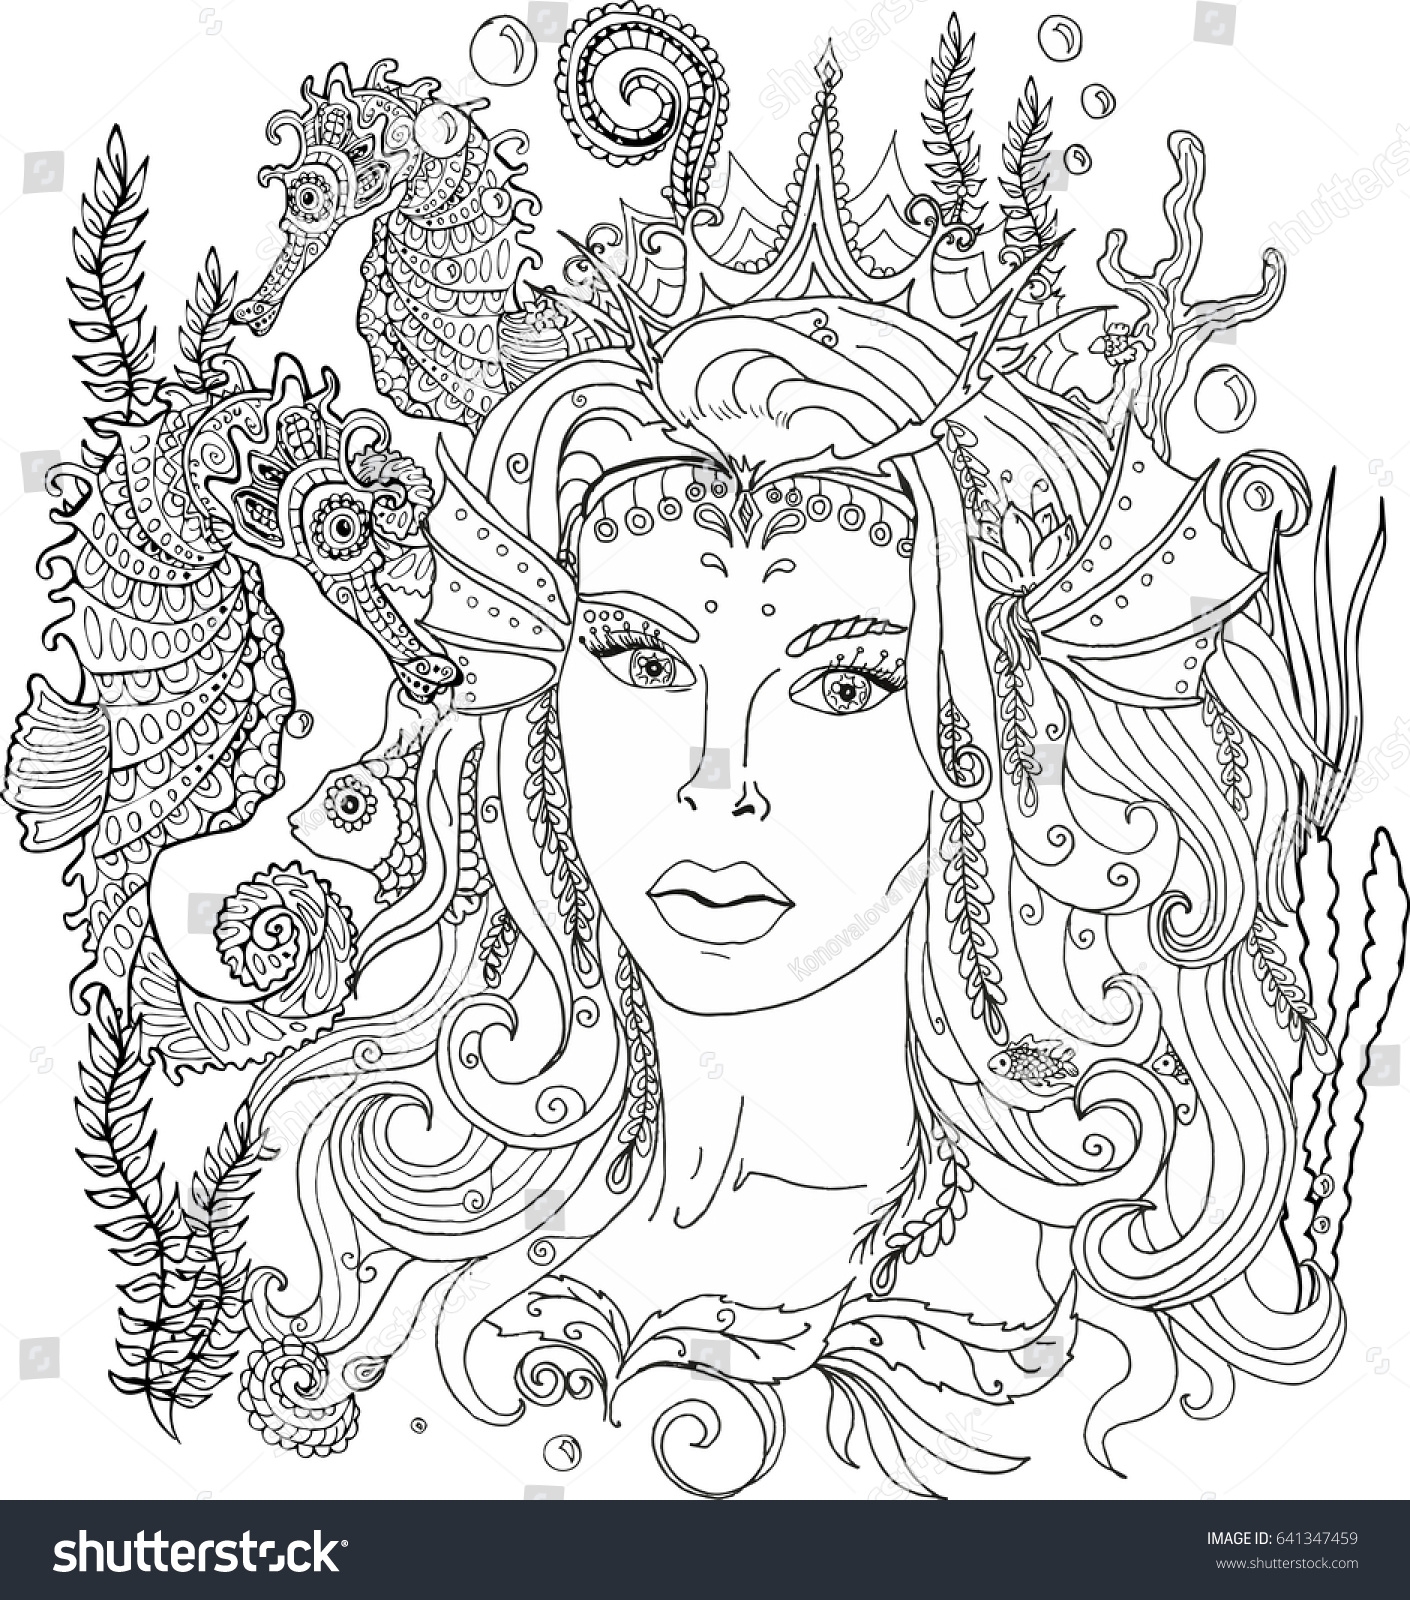 Real Mermaid Coloring Pages at GetColorings.com | Free ...